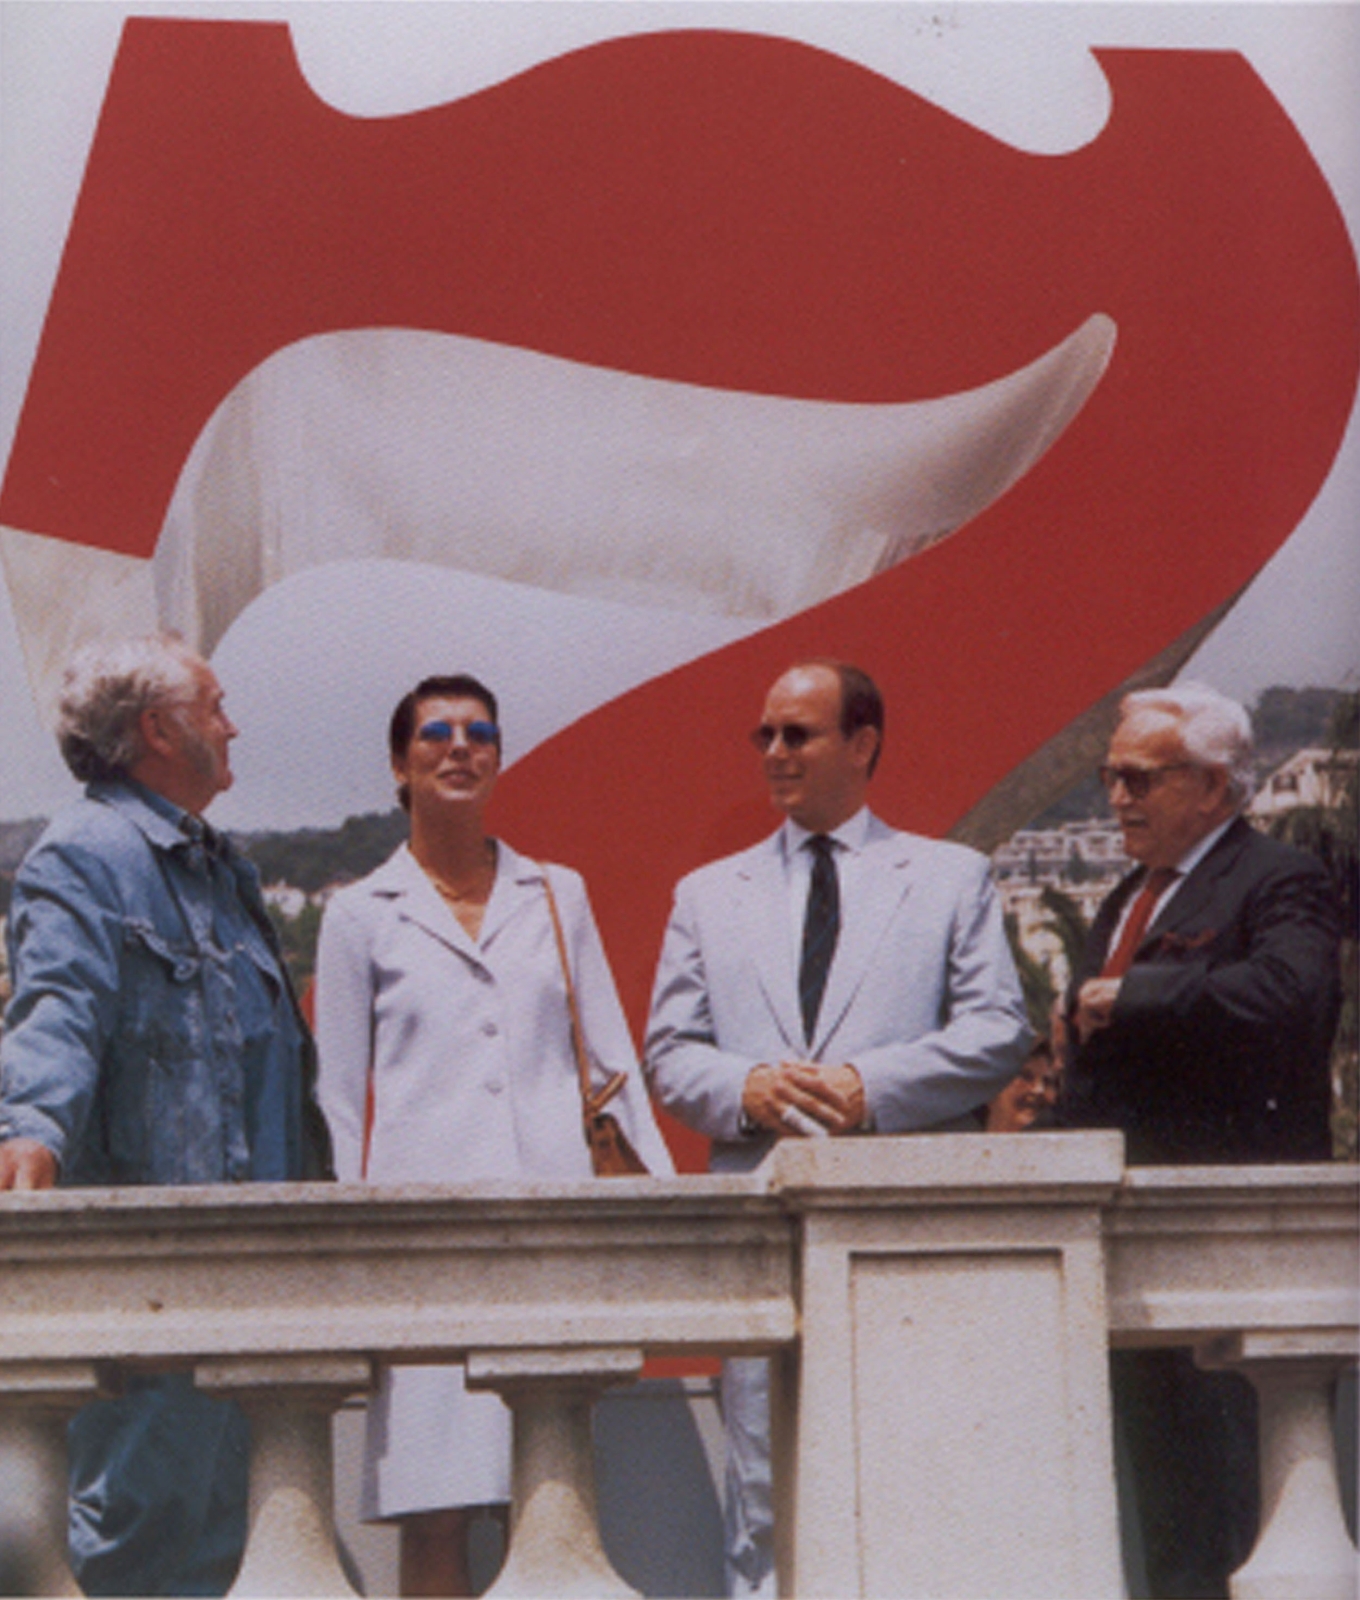 Left to right: Indiana, Princess Stephanie of Monaco, Prince Albert II of Monaco, and an unidentified man, in front of Indiana&rsquo;s sculpture Seven (1980) in Monte Carlo, 1997

Courtesy of the artist